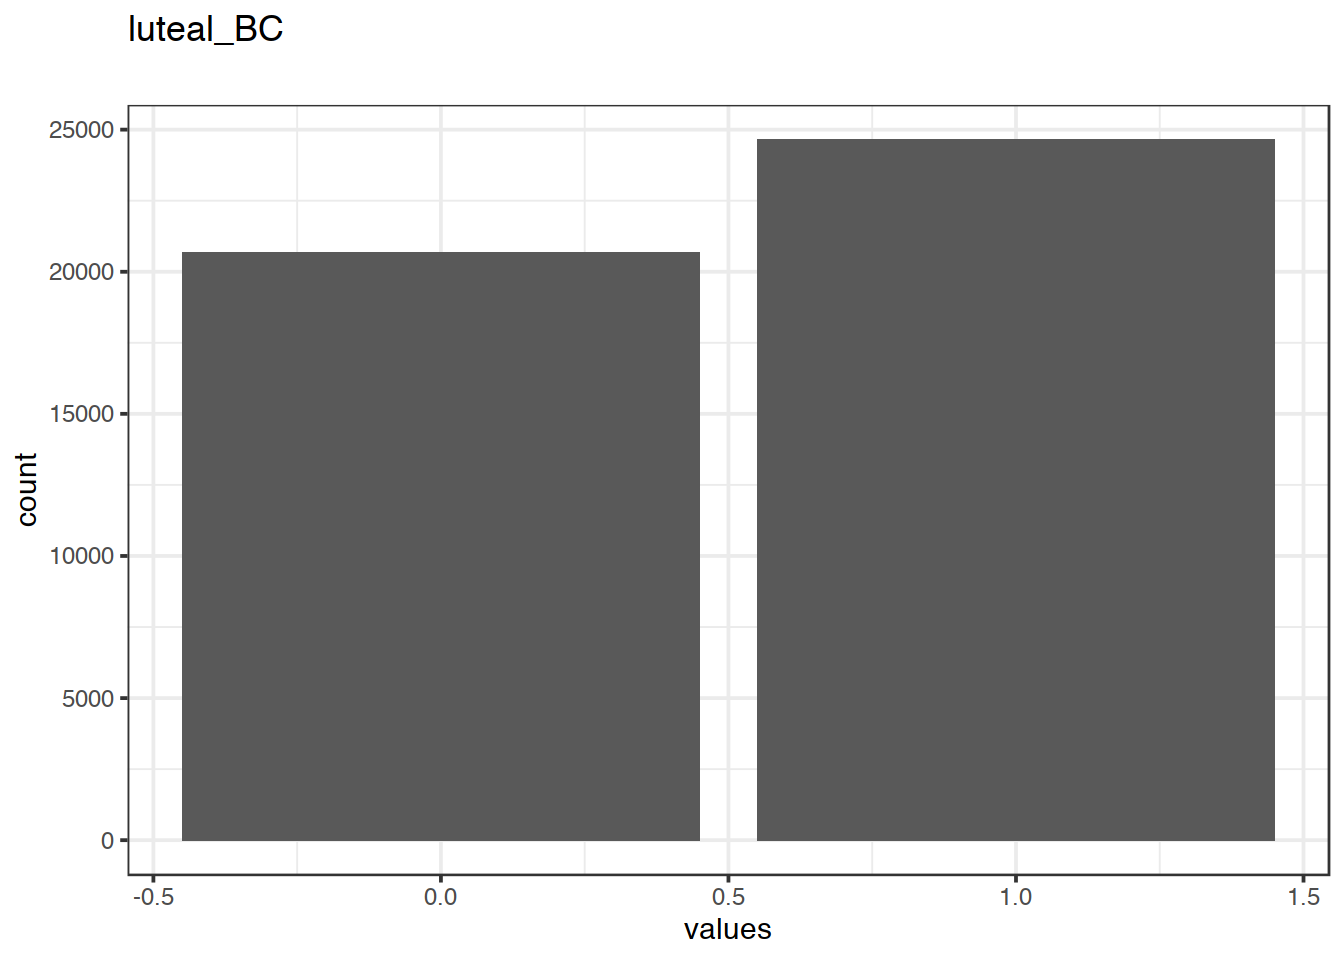 Distribution of values for luteal_BC